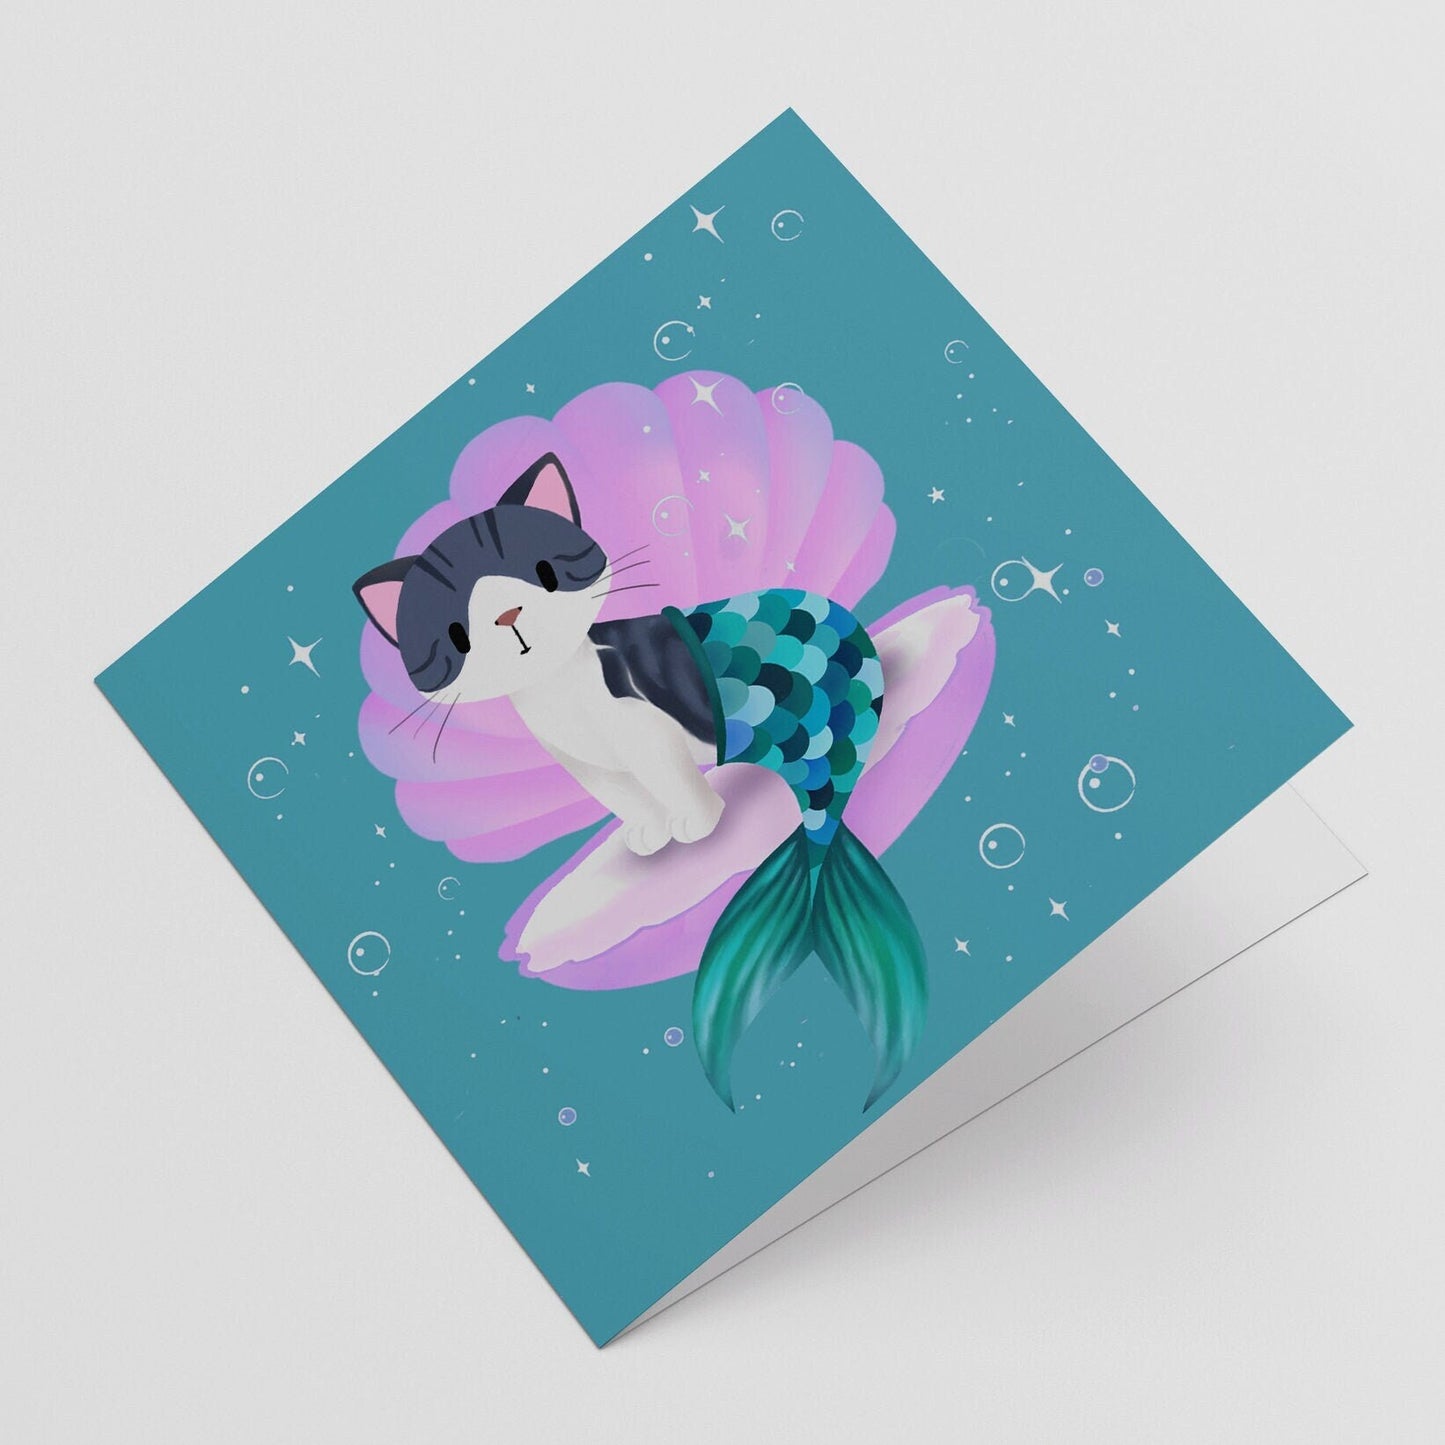 Rocky the Purrmaid - Any Occasion Greeting Card, Greeting Cards/Postcards, Greeting & Note Cards